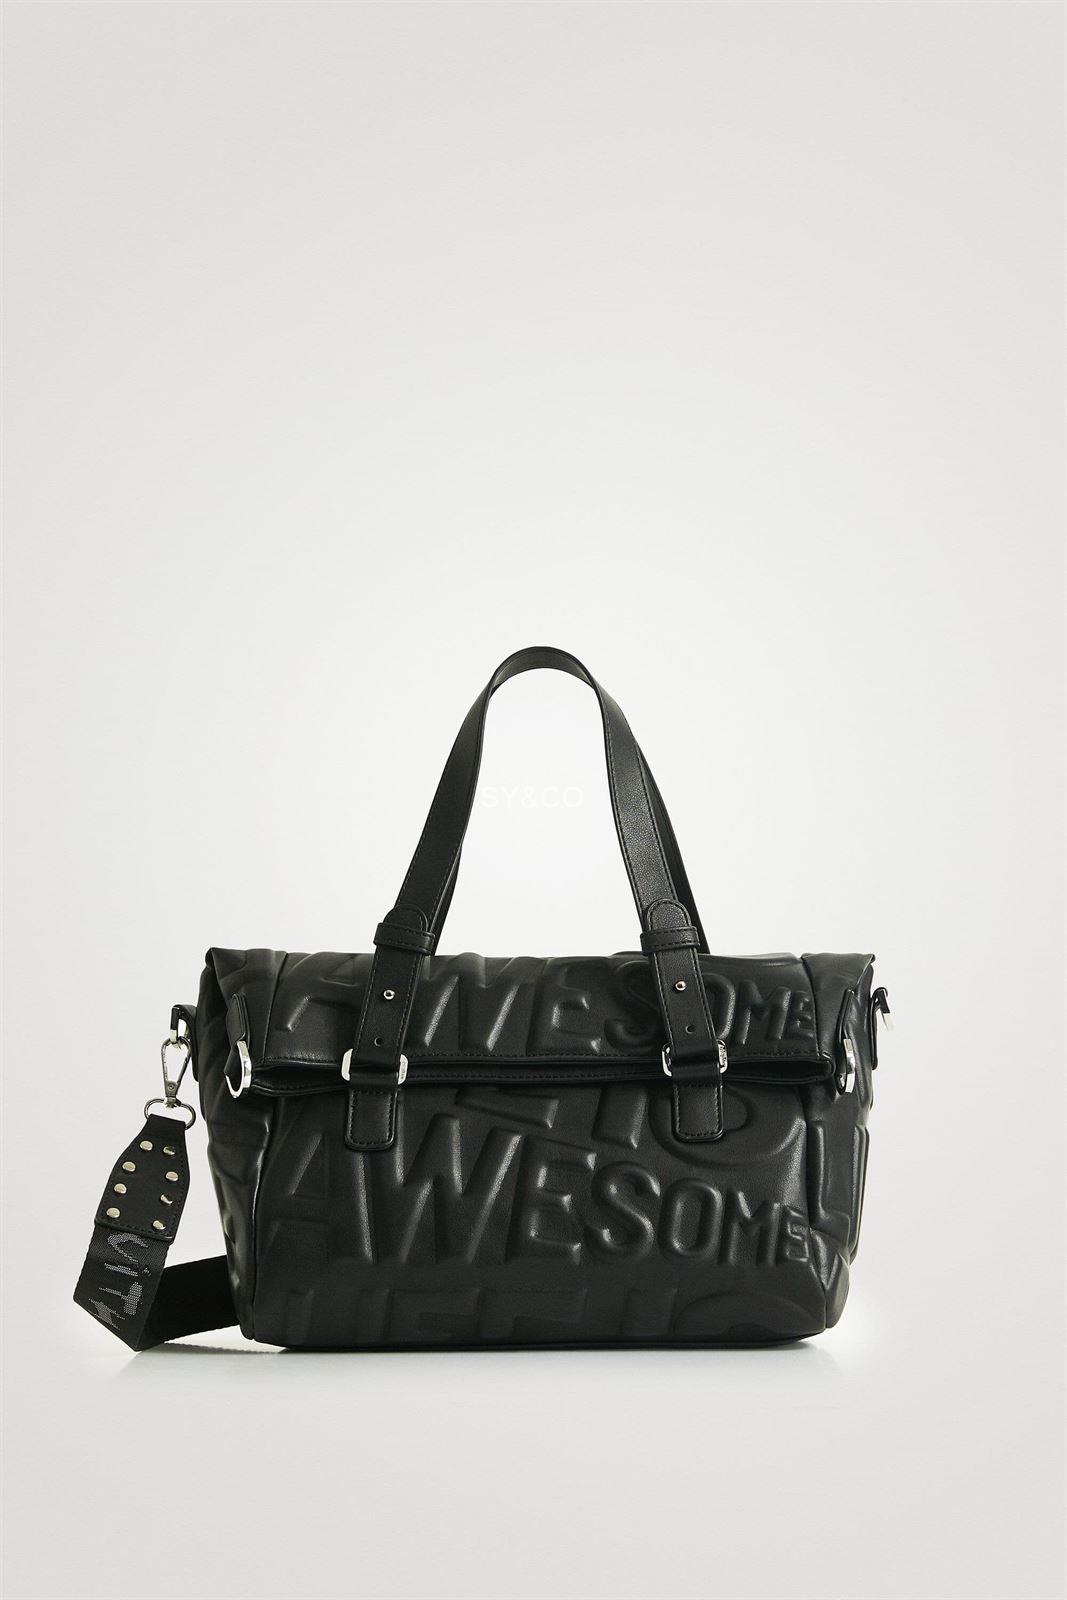 Bolso Desigual negro "Life is awesome" 22SAXP98 - Imagen 1